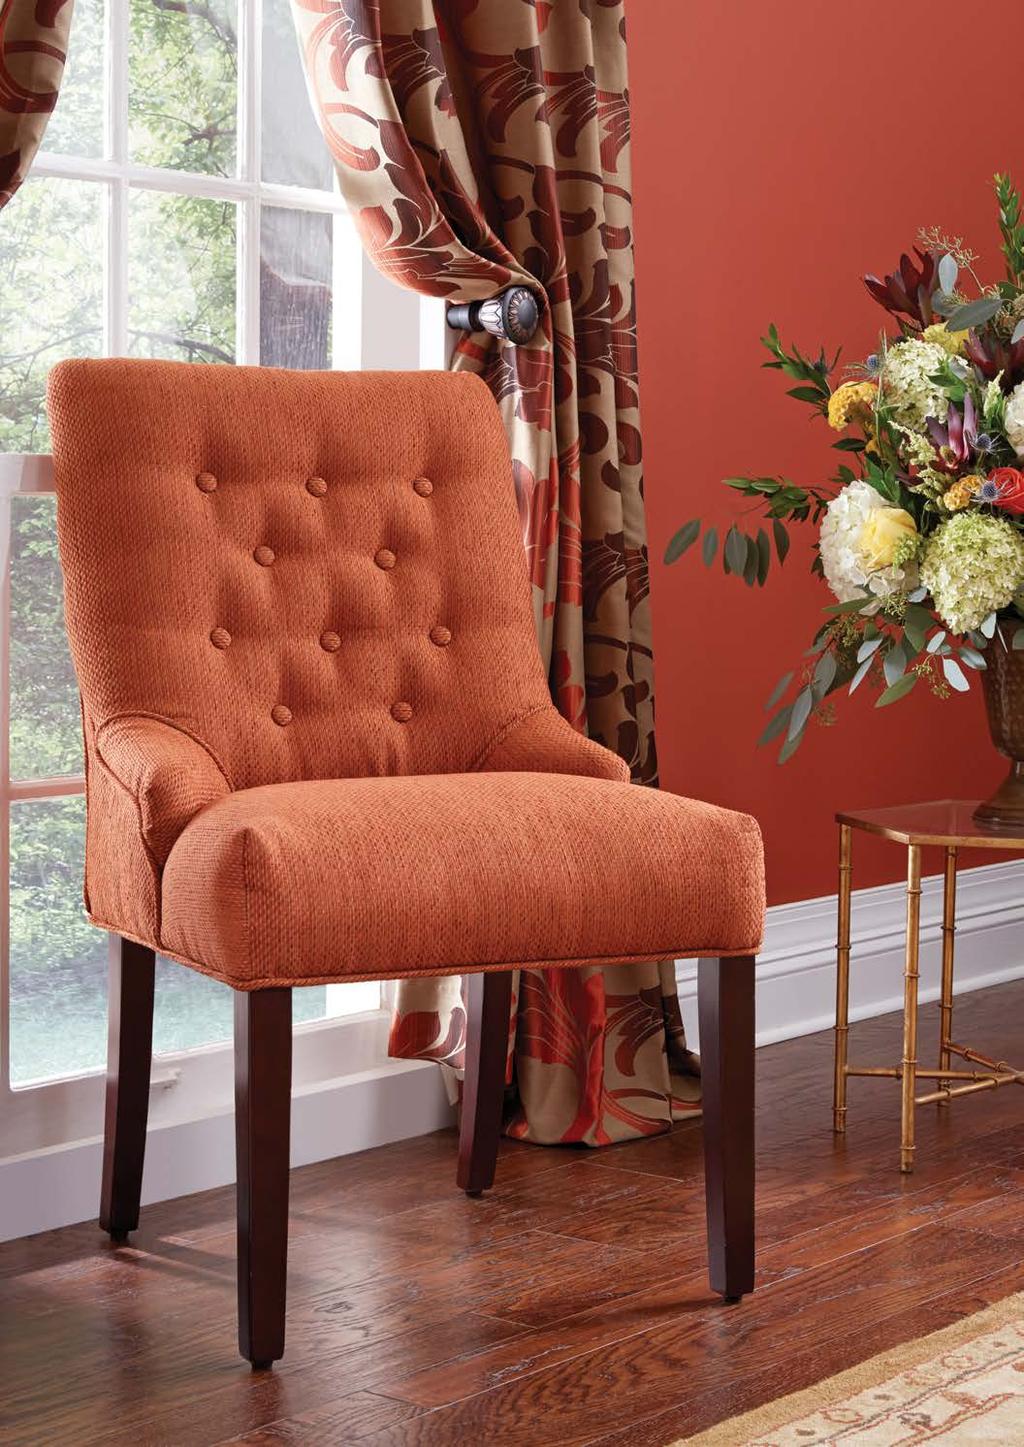 Rowley How-To Guide Upholstering an Accent Chair in Two Pieces with Button Details Any chair can go from drab to fab with a few basic upholstery techniques.